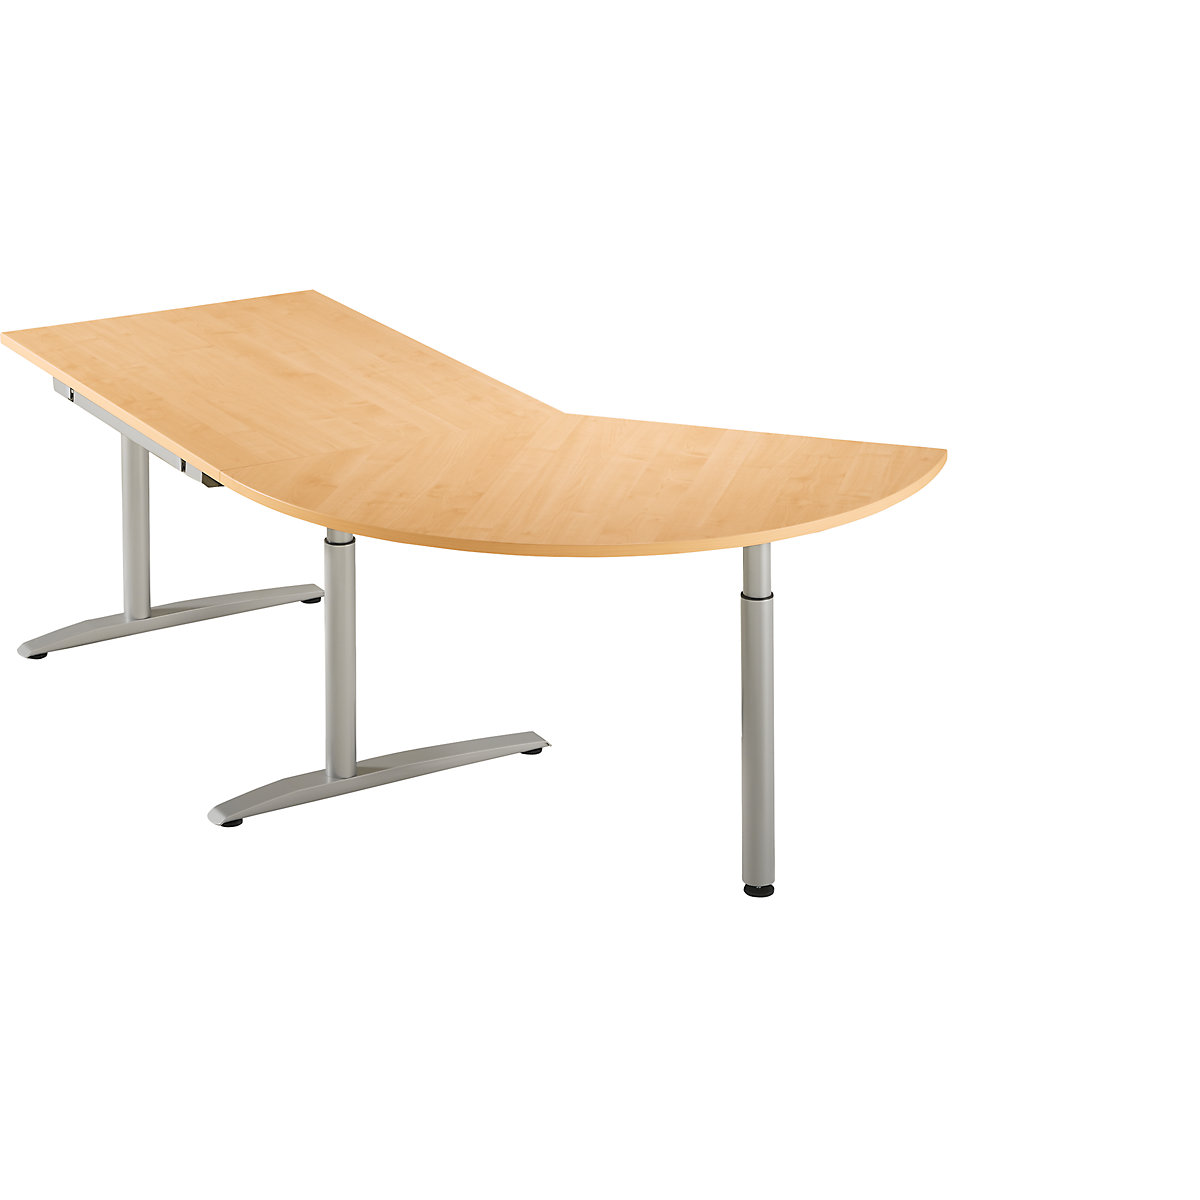 Add-on table, height adjustable from 680 – 820 mm HANNA, 3/8 circle with support foot, beech finish-6